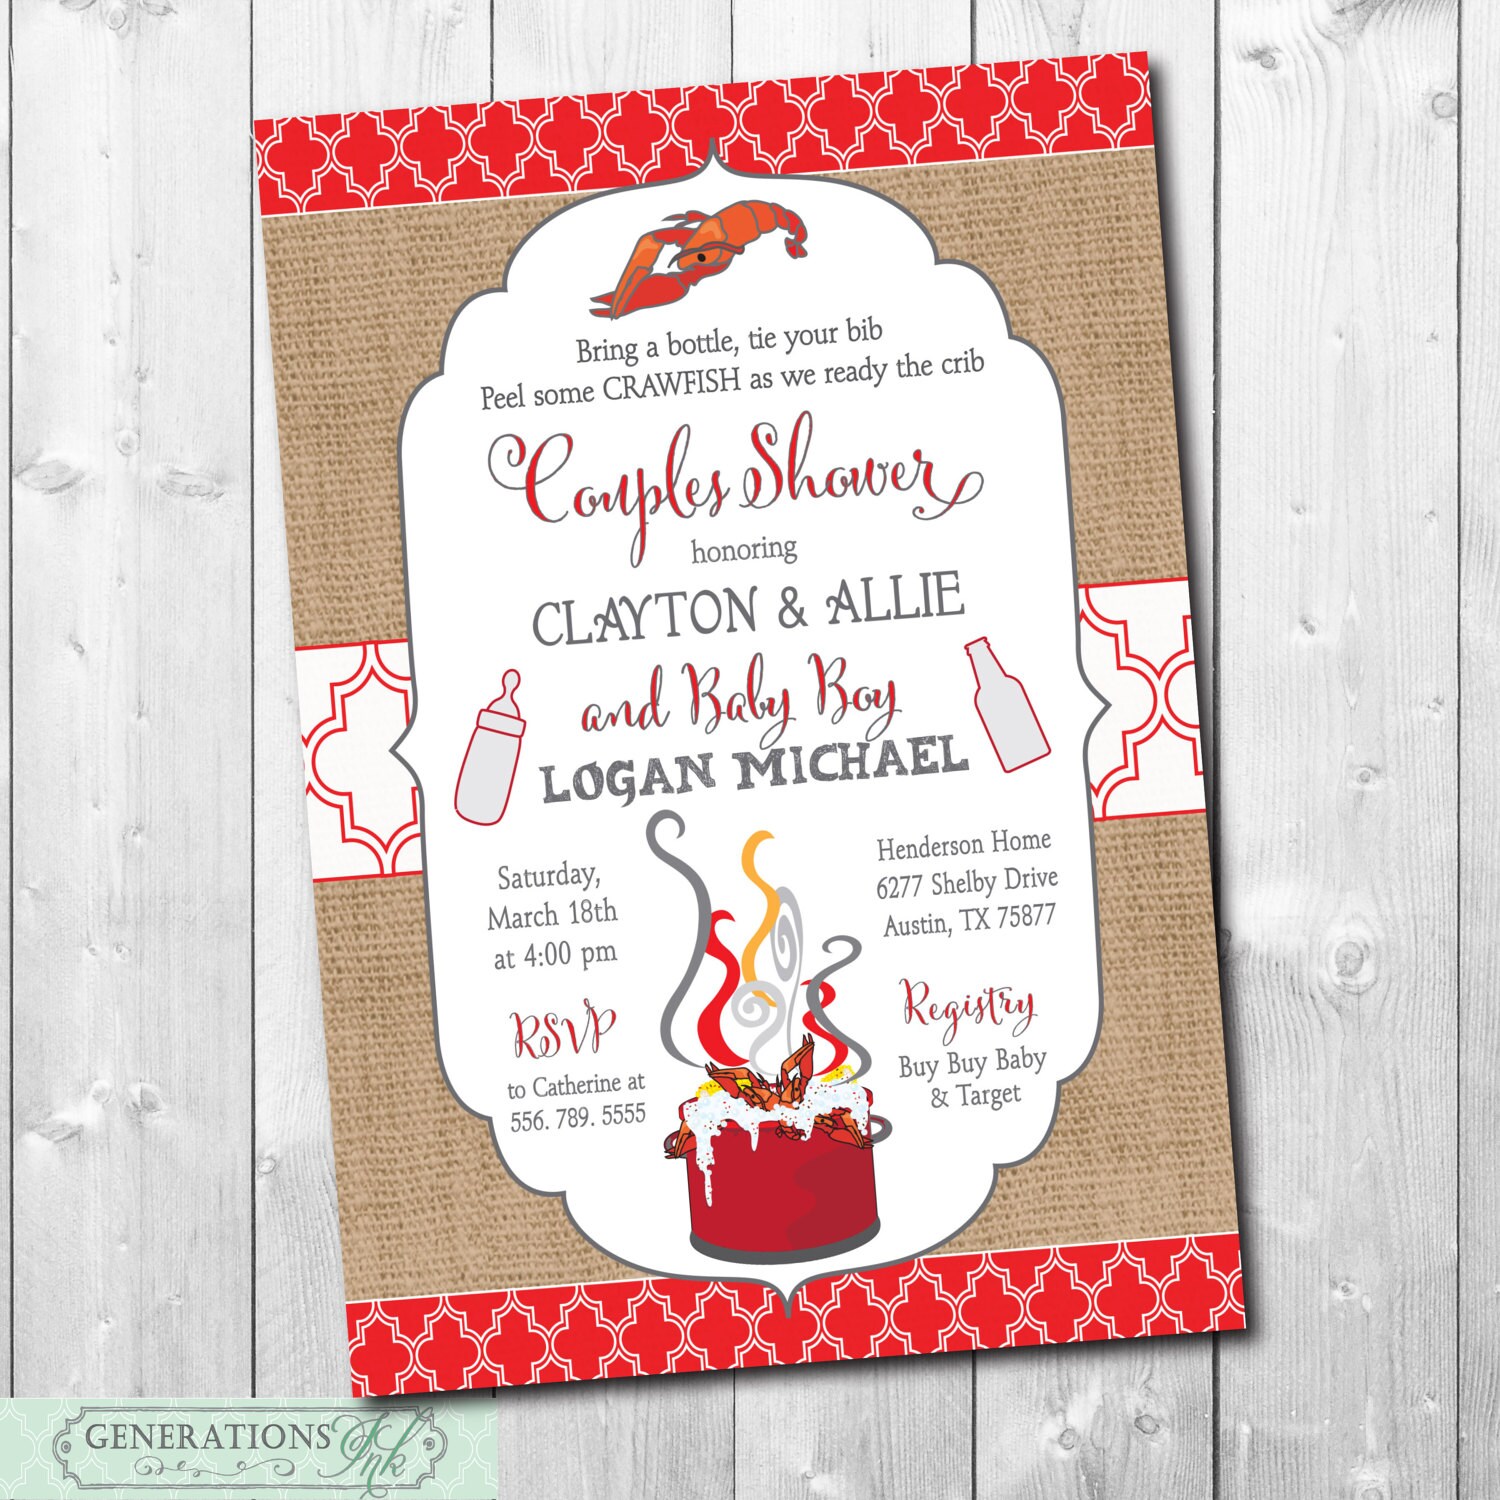 Crawfish Boil & Couples Baby Shower Invitation Printable/Seafood Boil, Baby Shower/Digital File/Printable/Wording Can Be Changed